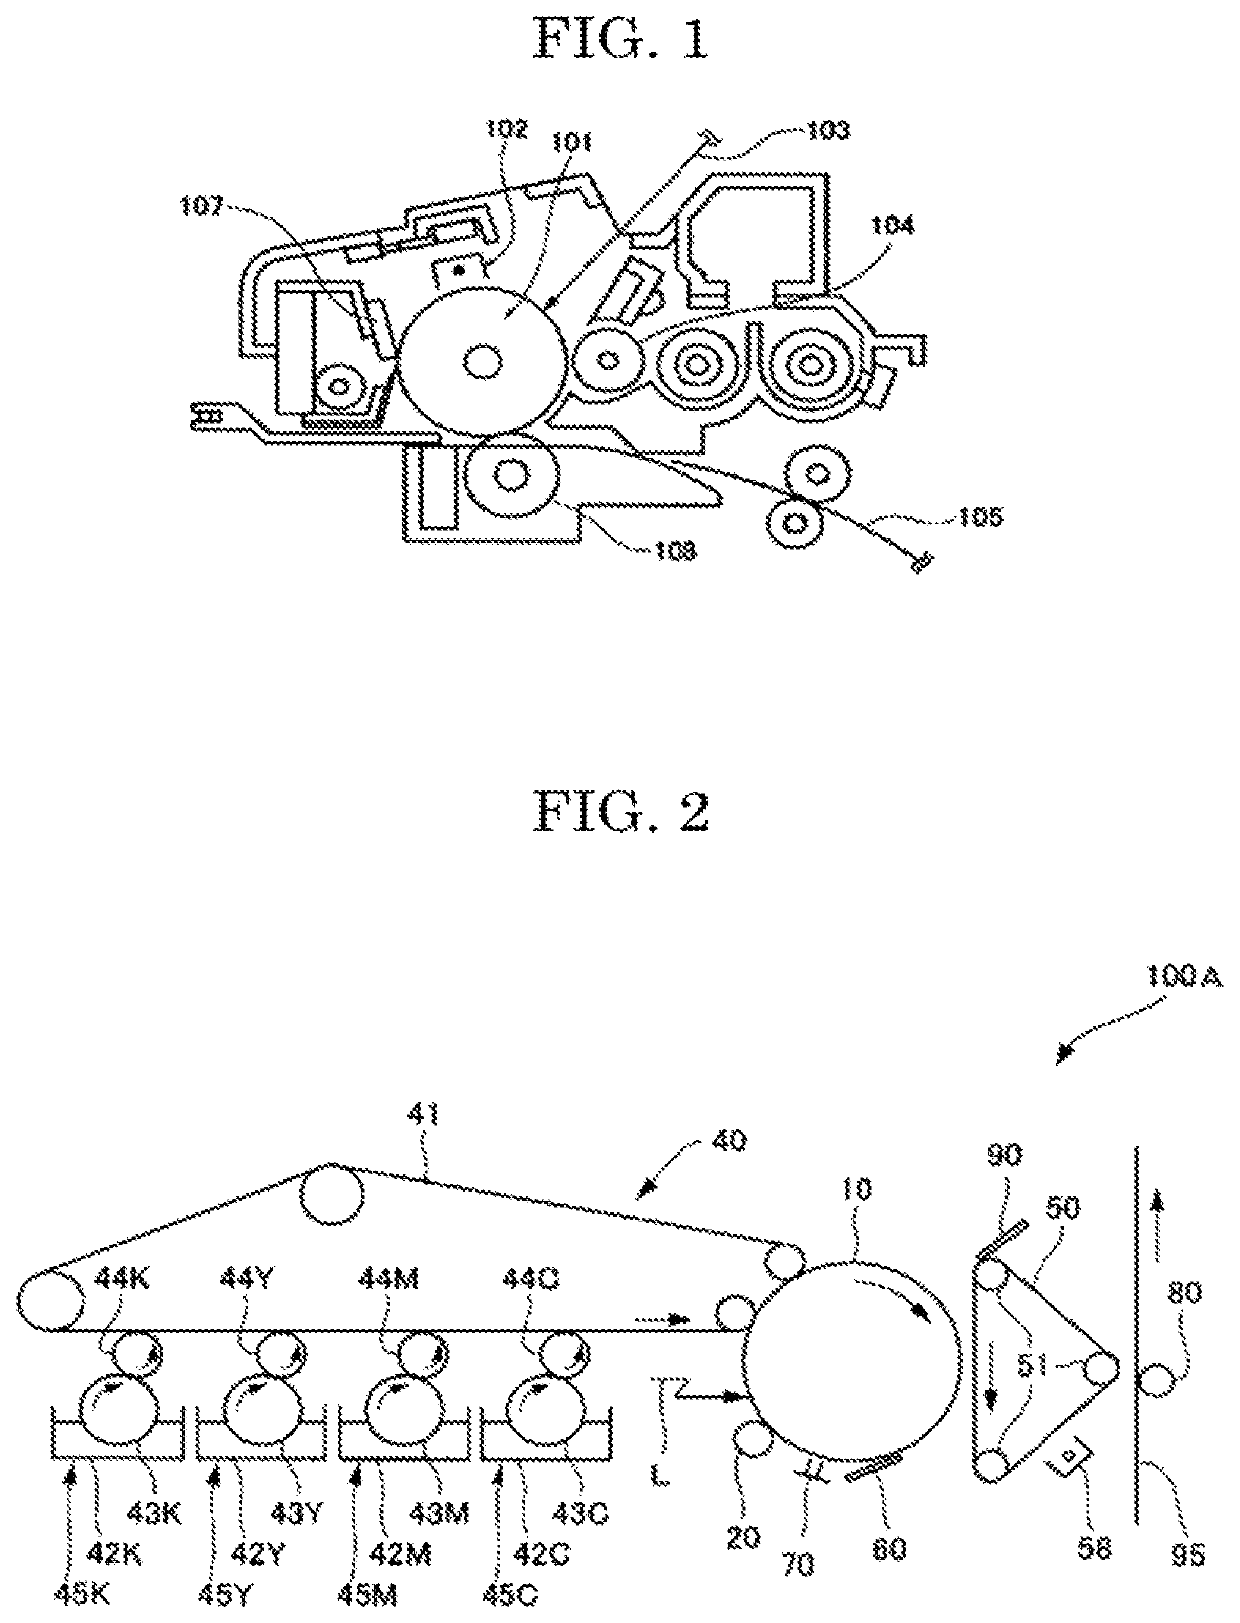 Toner, developer, and image forming apparatus